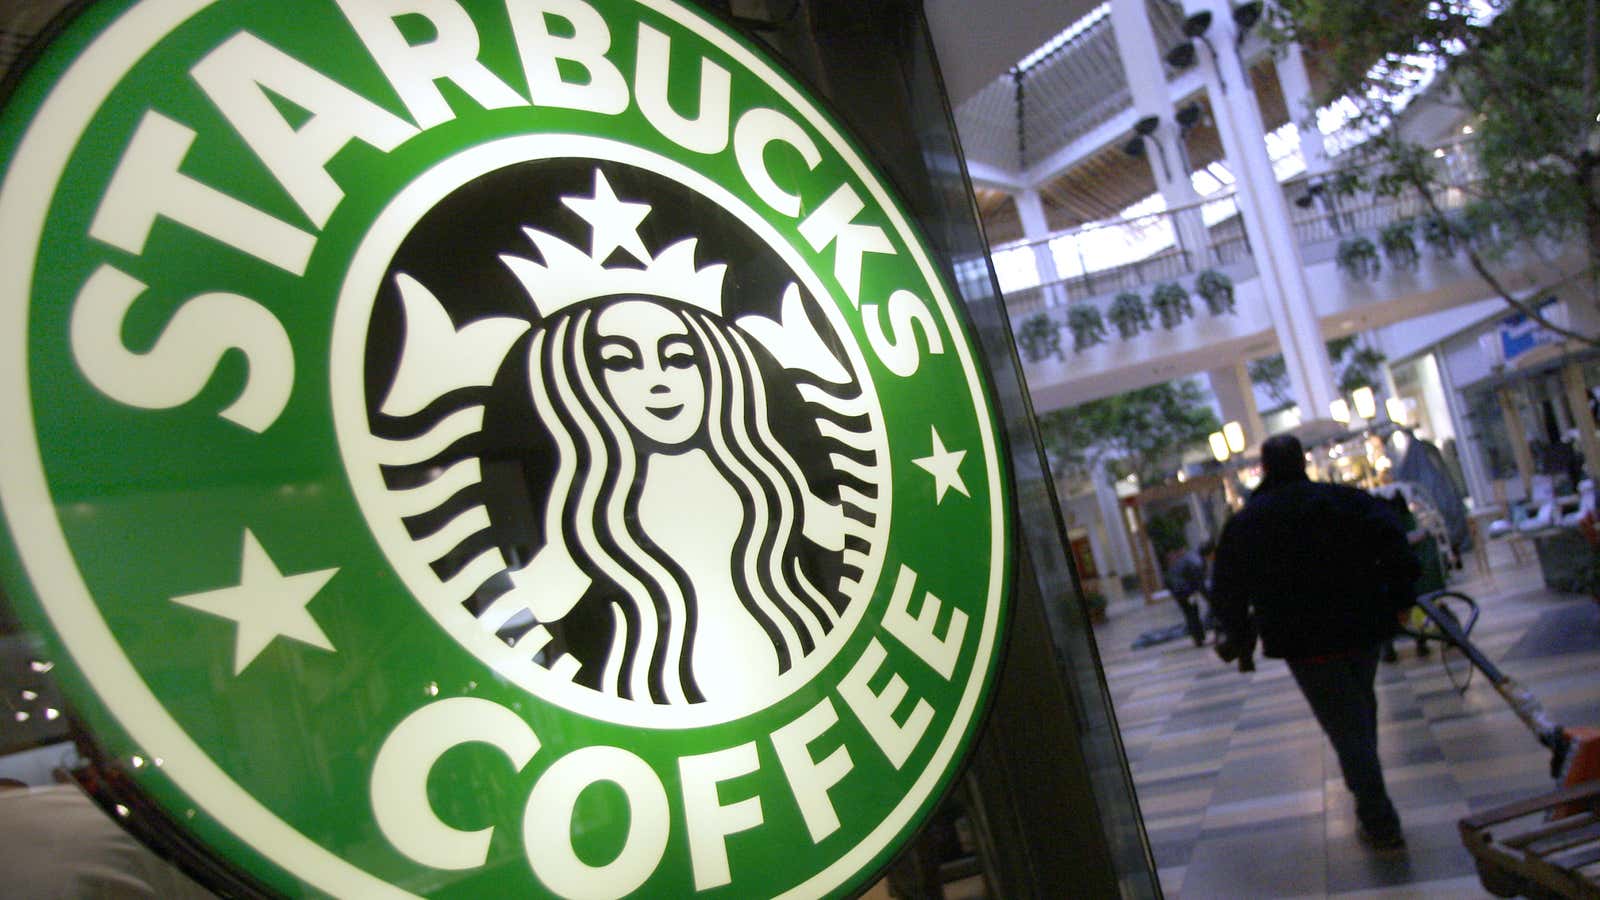 Starbucks is taking its specialty Teavana brand to India.